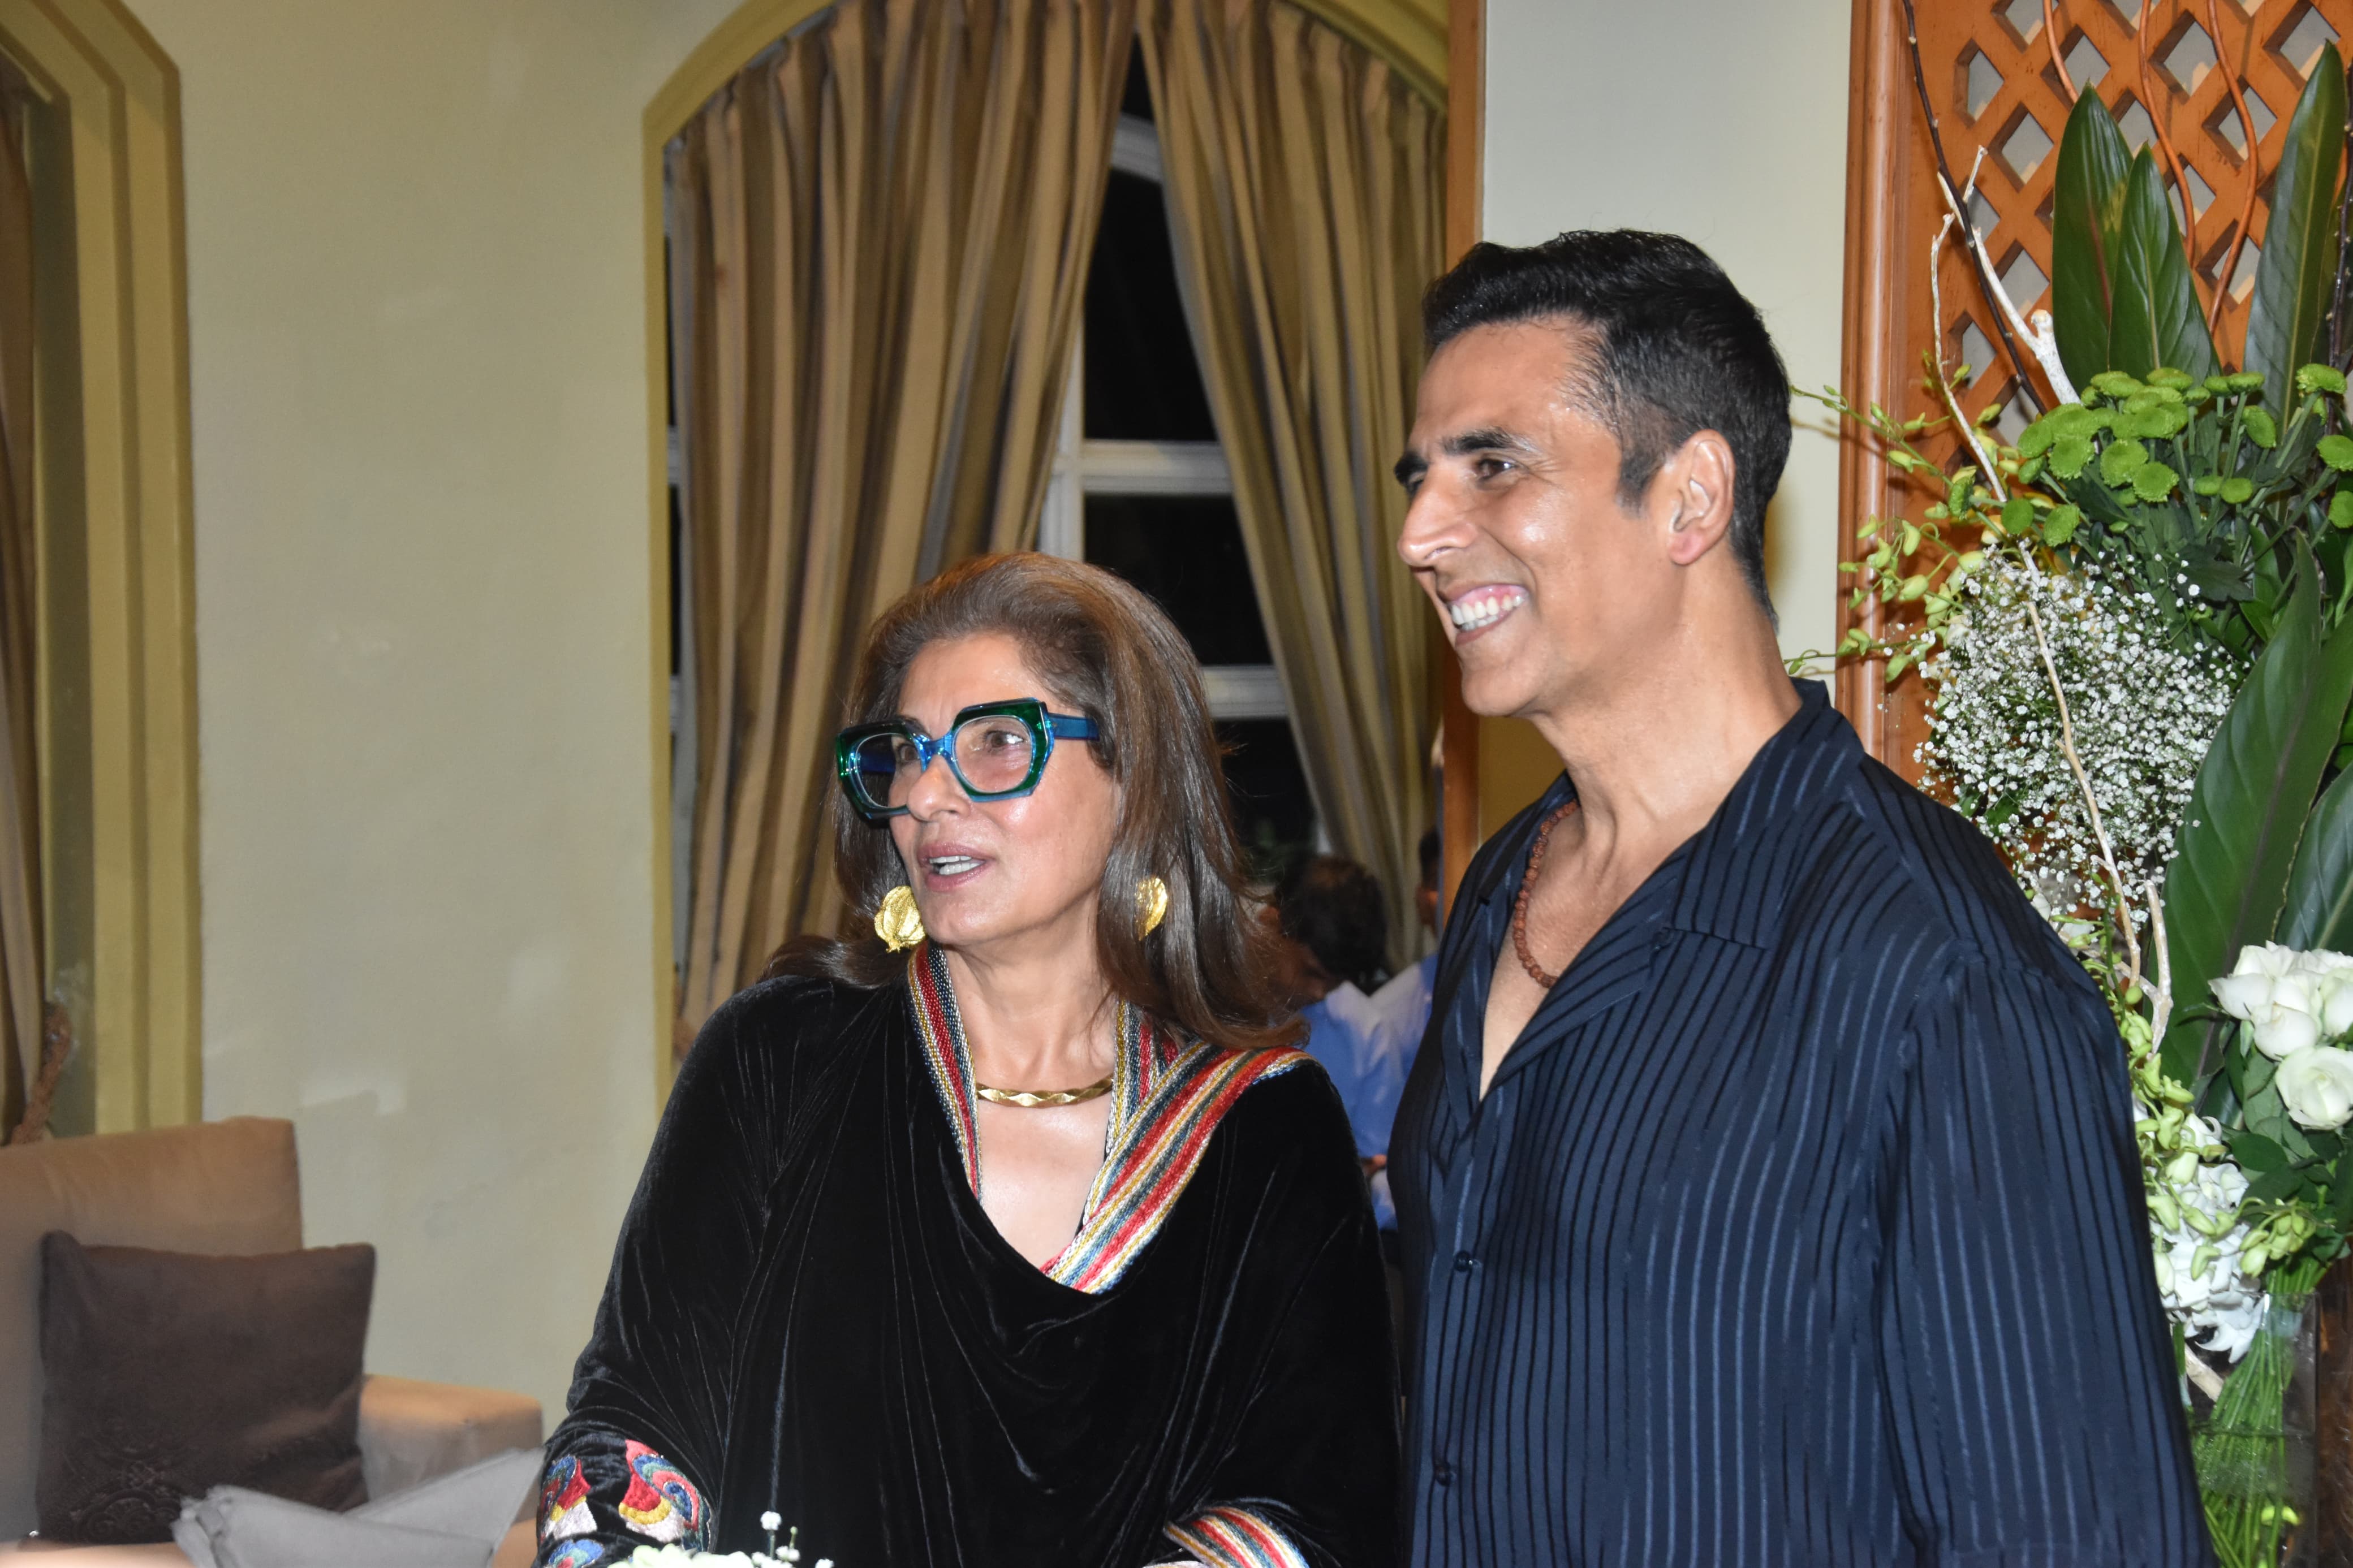 Dimple Kapadia and Akshay Kumar posed together as they were snapped 